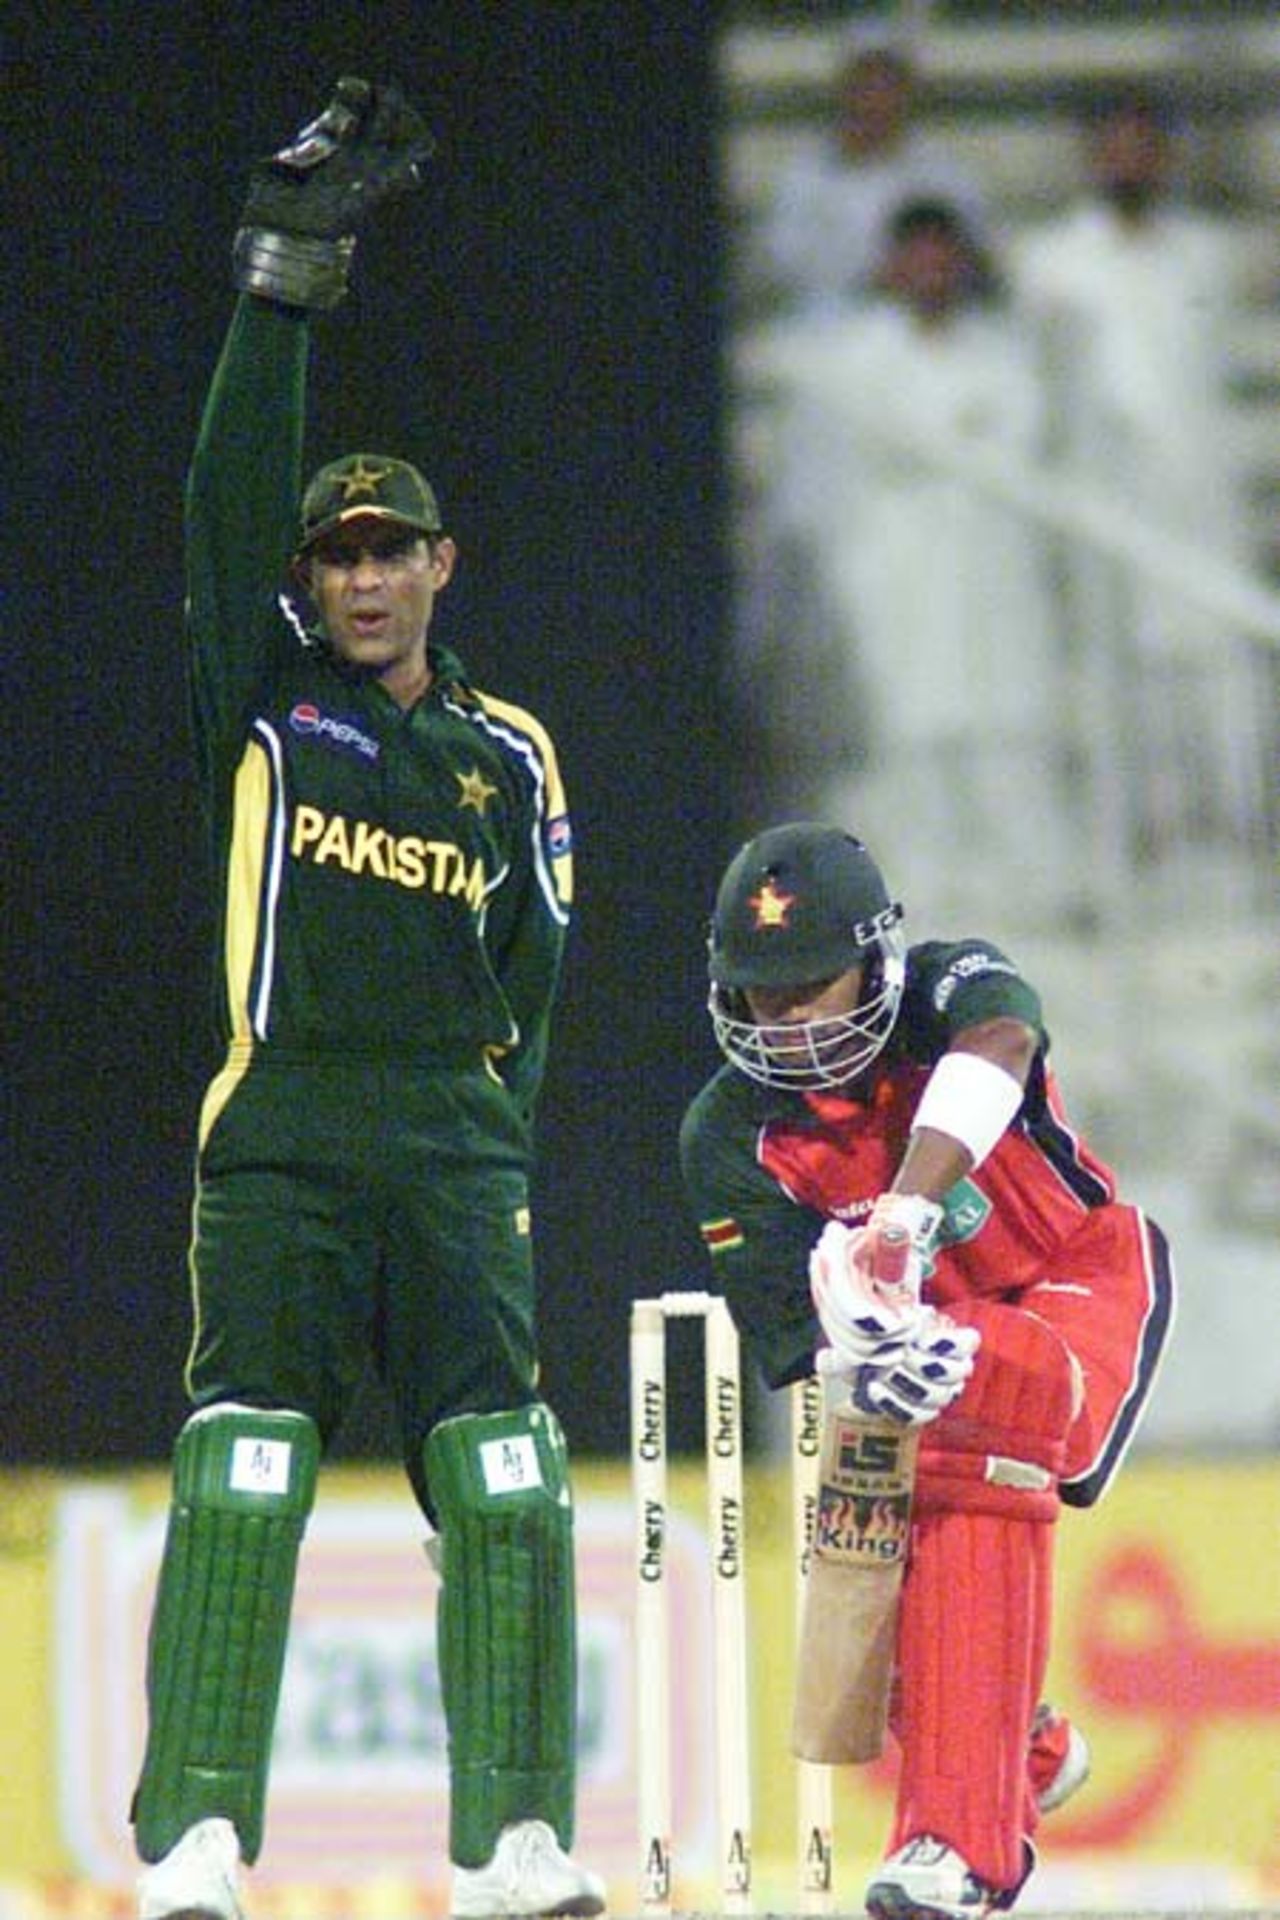 Strong appeal for an lbw by keeper Rashid Latif, 1st Match: Pakistan v Zimbabwe, Cherry Blossom Sharjah Cup, 3 April 2003